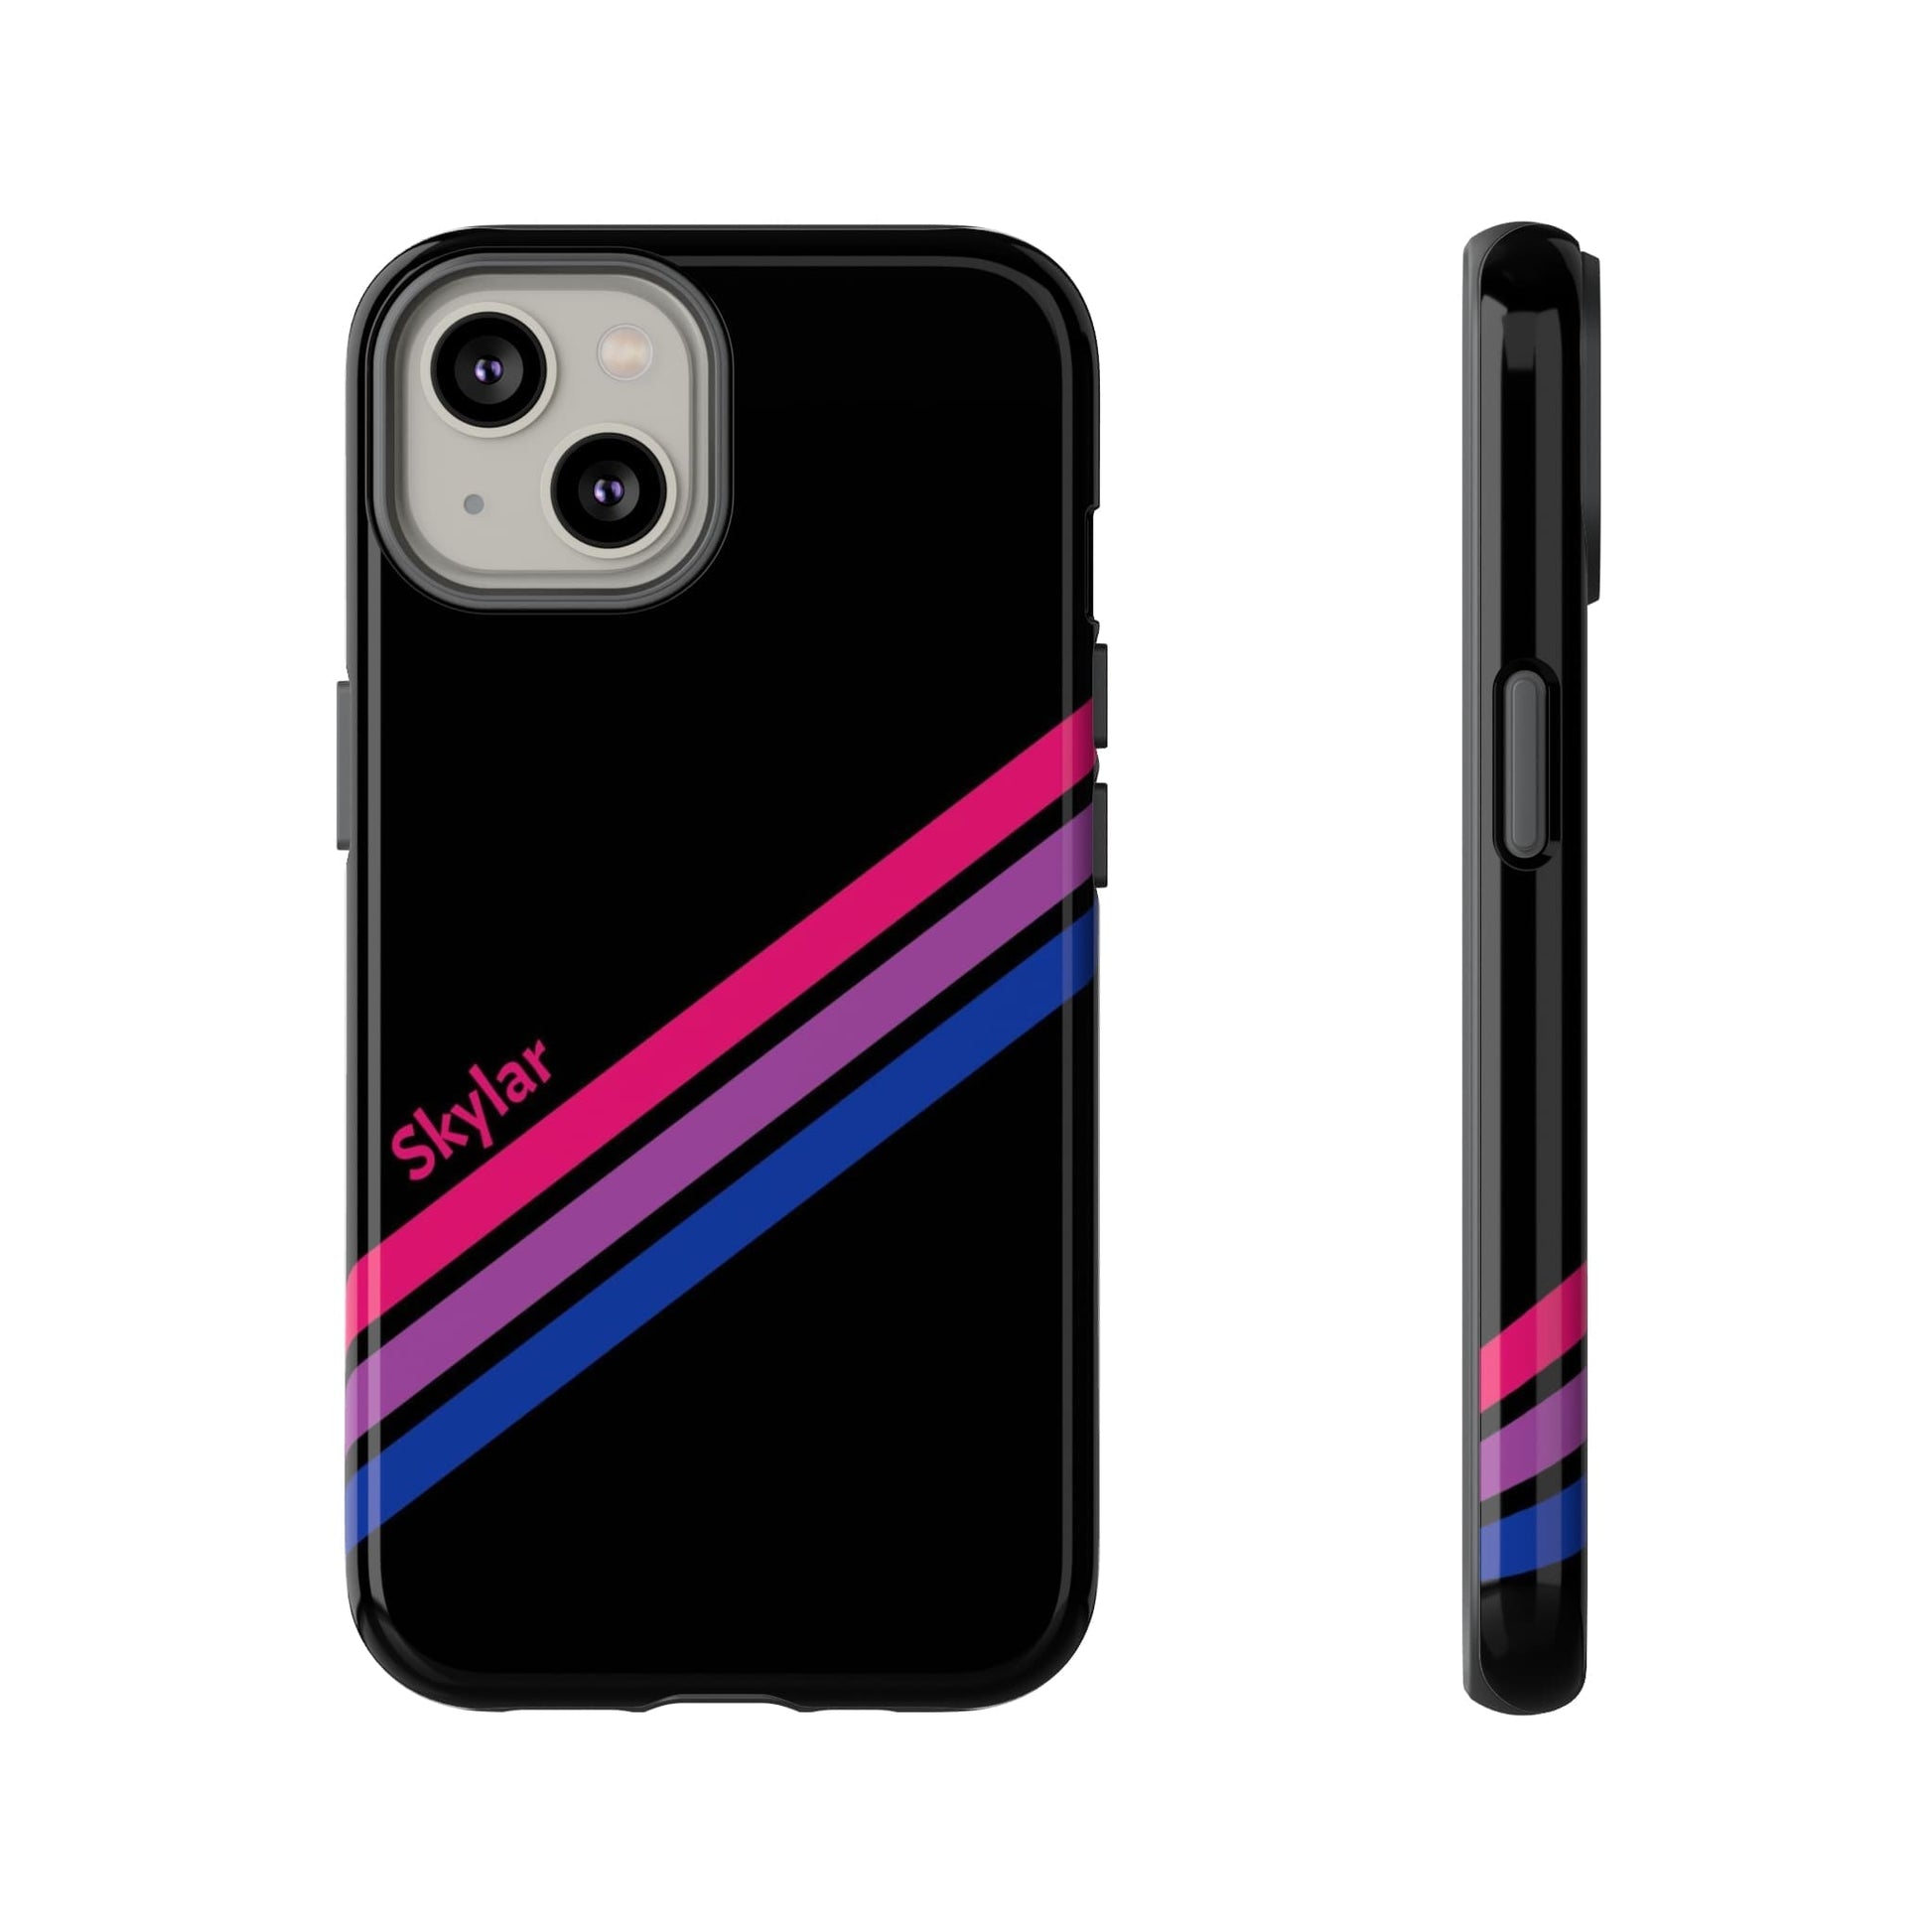 bisexual phone case personalized, front